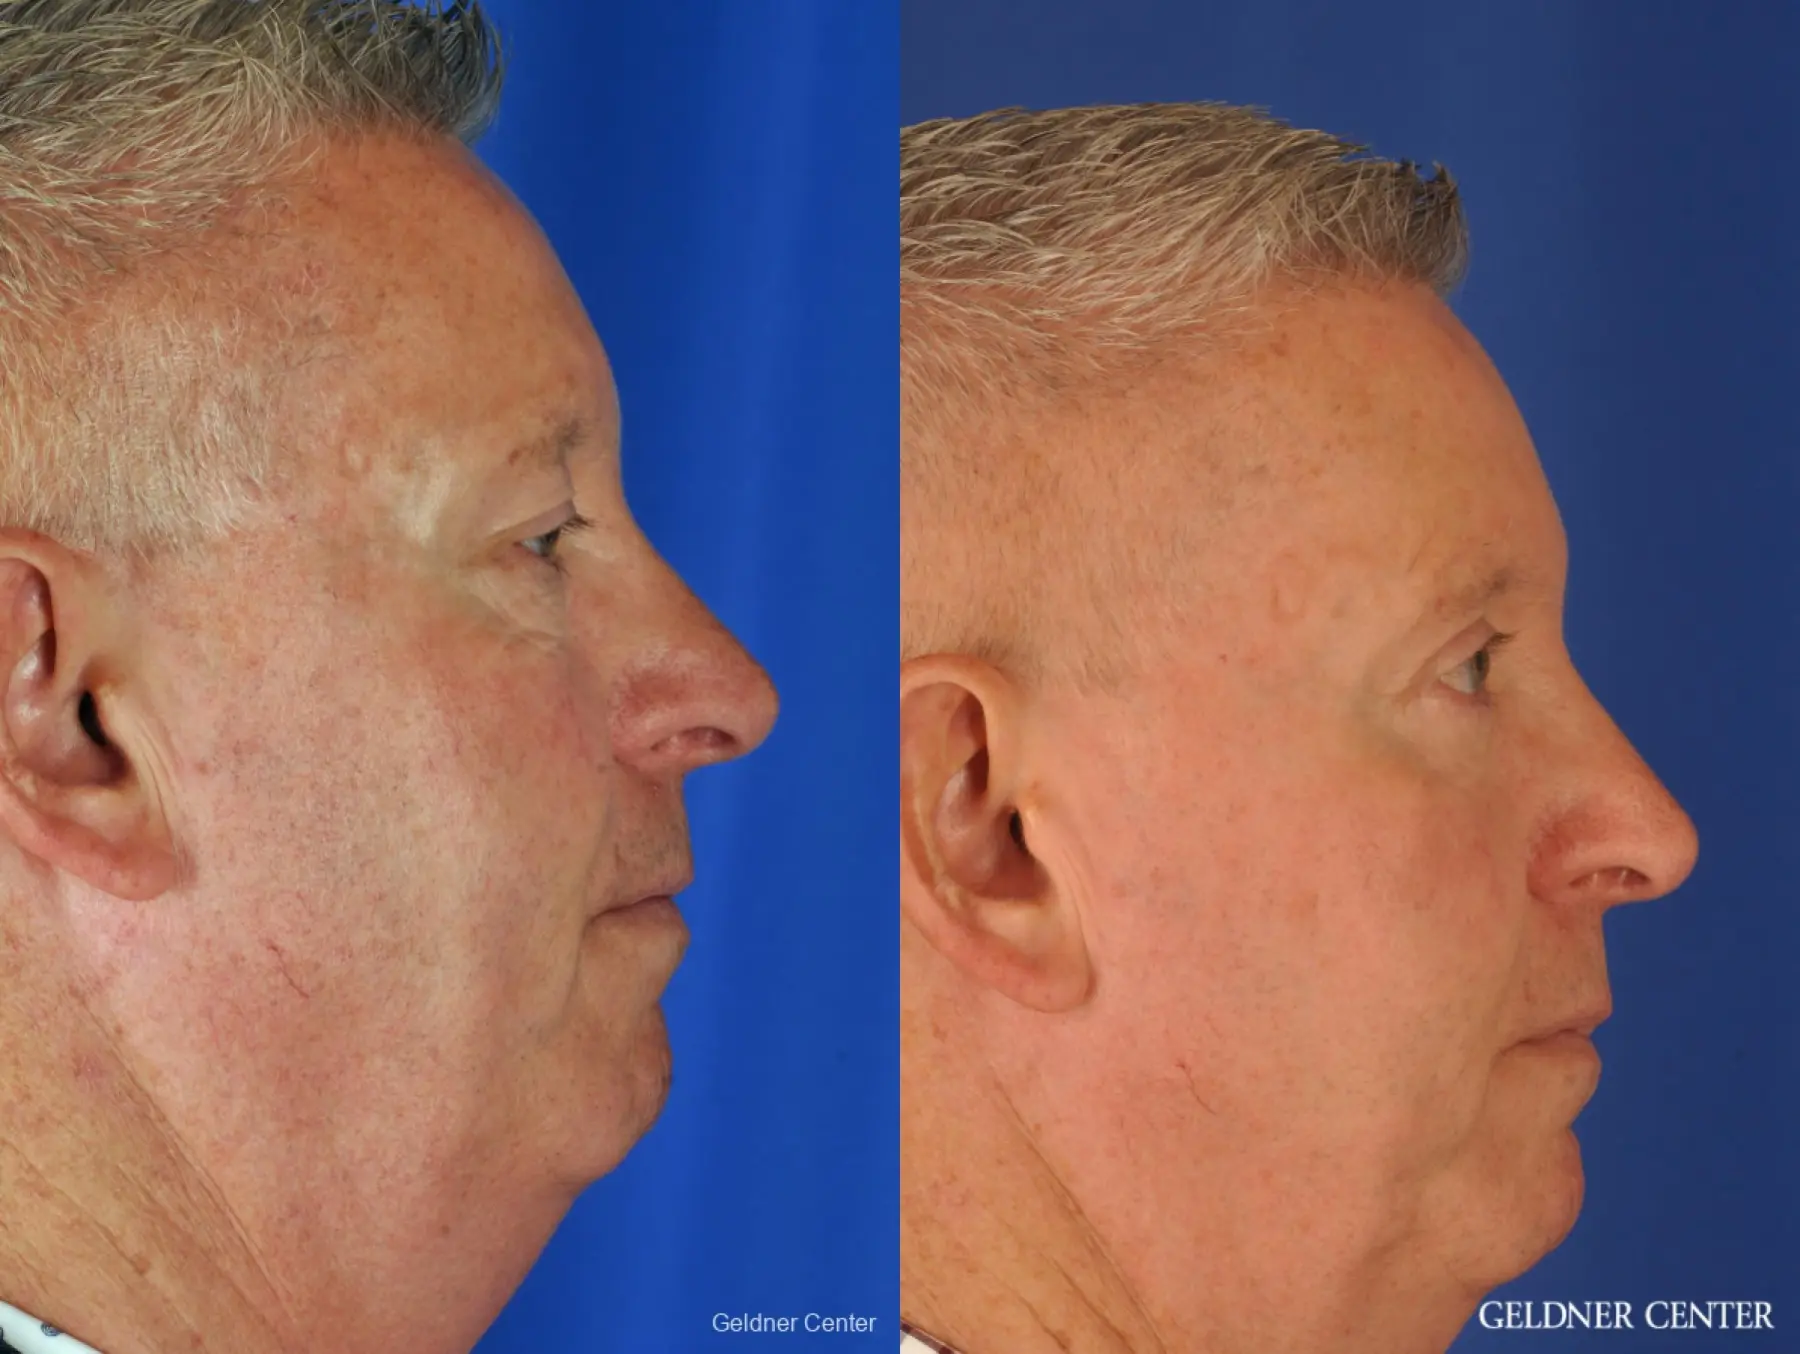 Eyelid Lift For Men: Patient 1 - Before and After 5